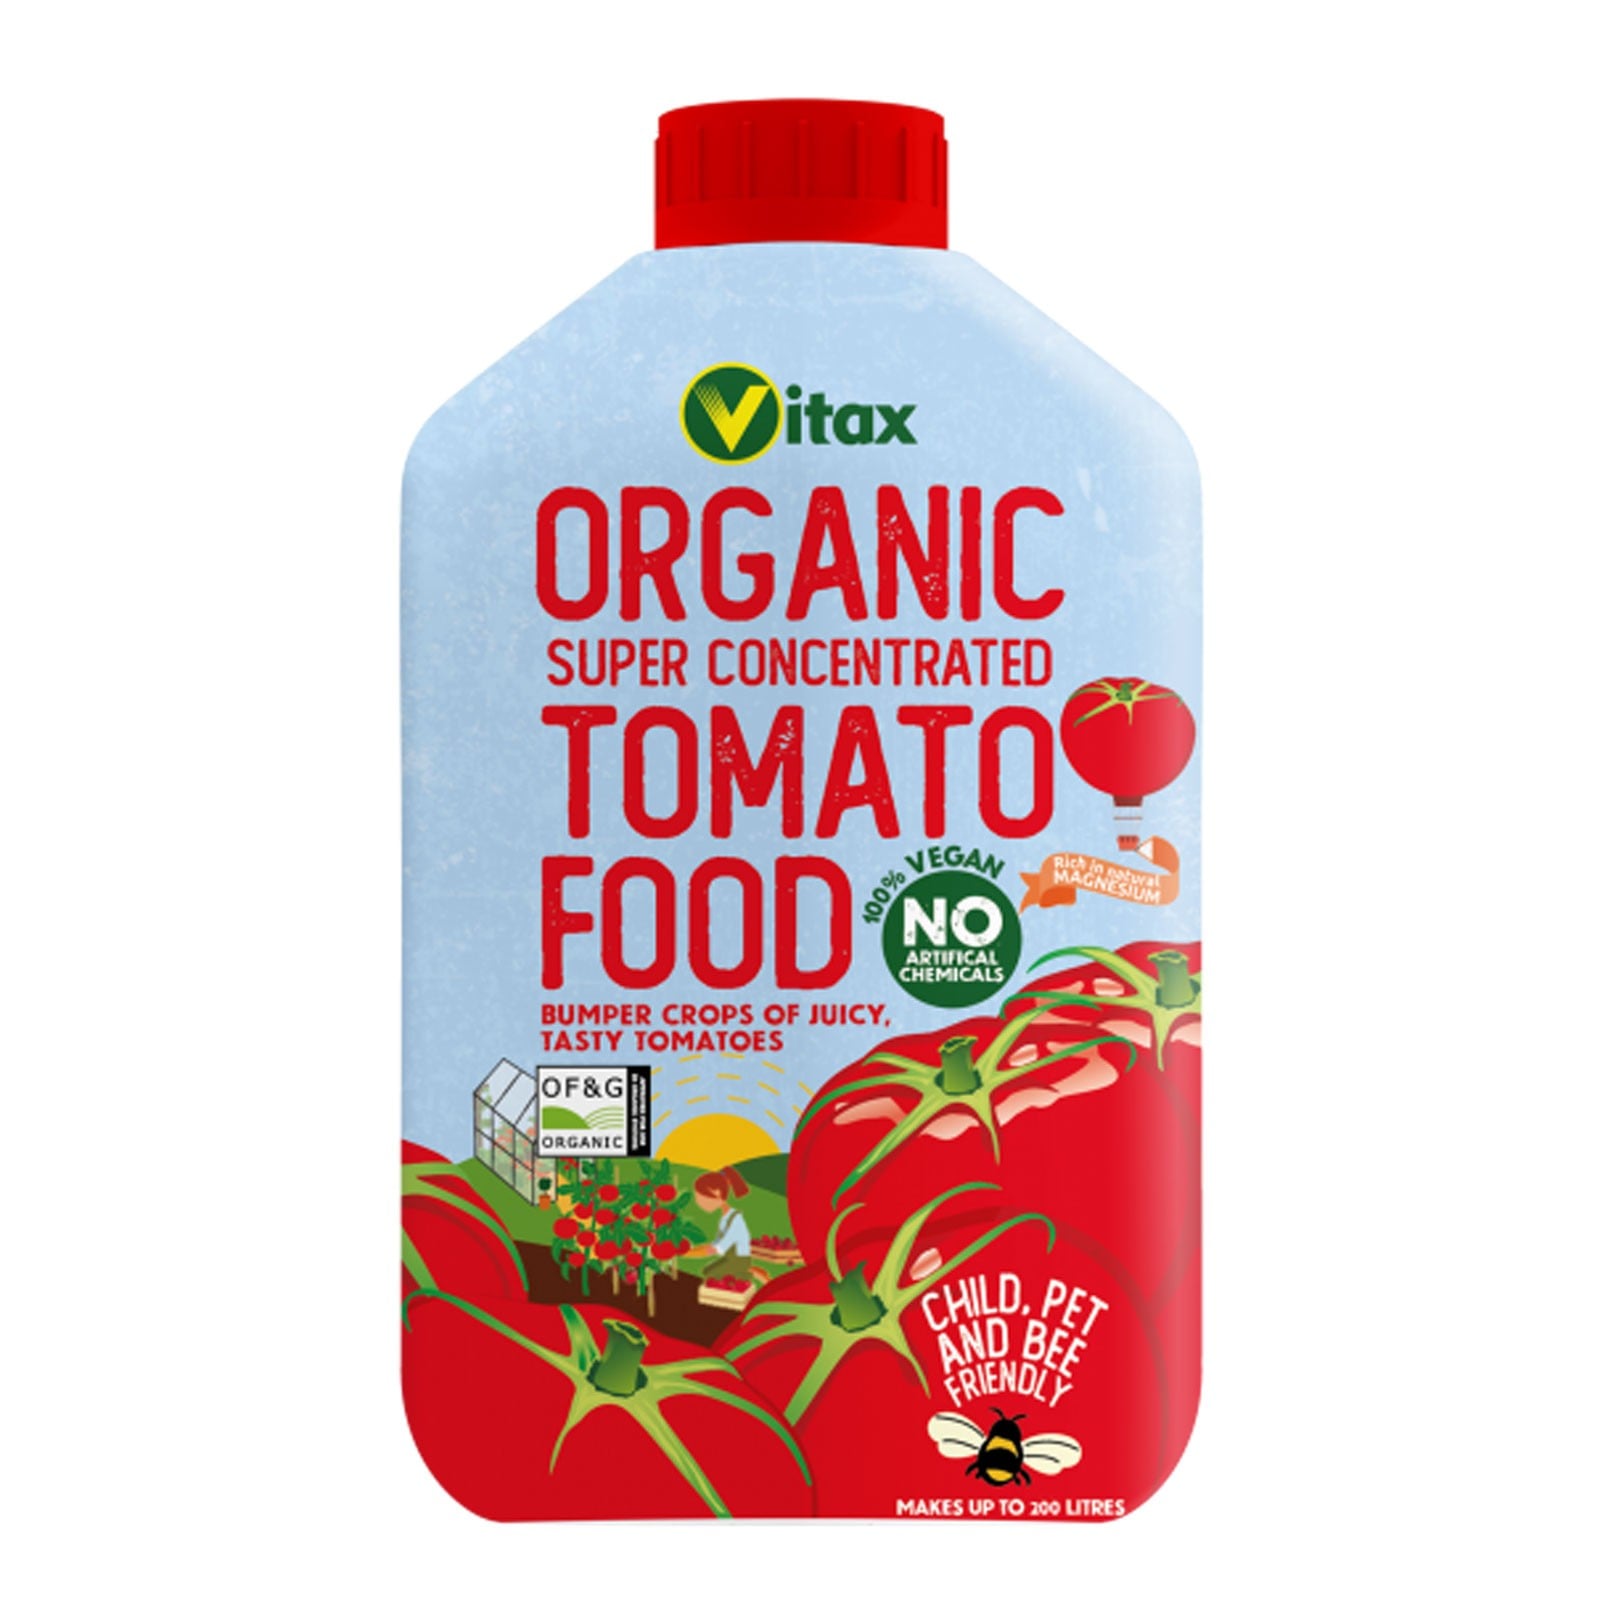 Organic Super Concentrated Tomato Food